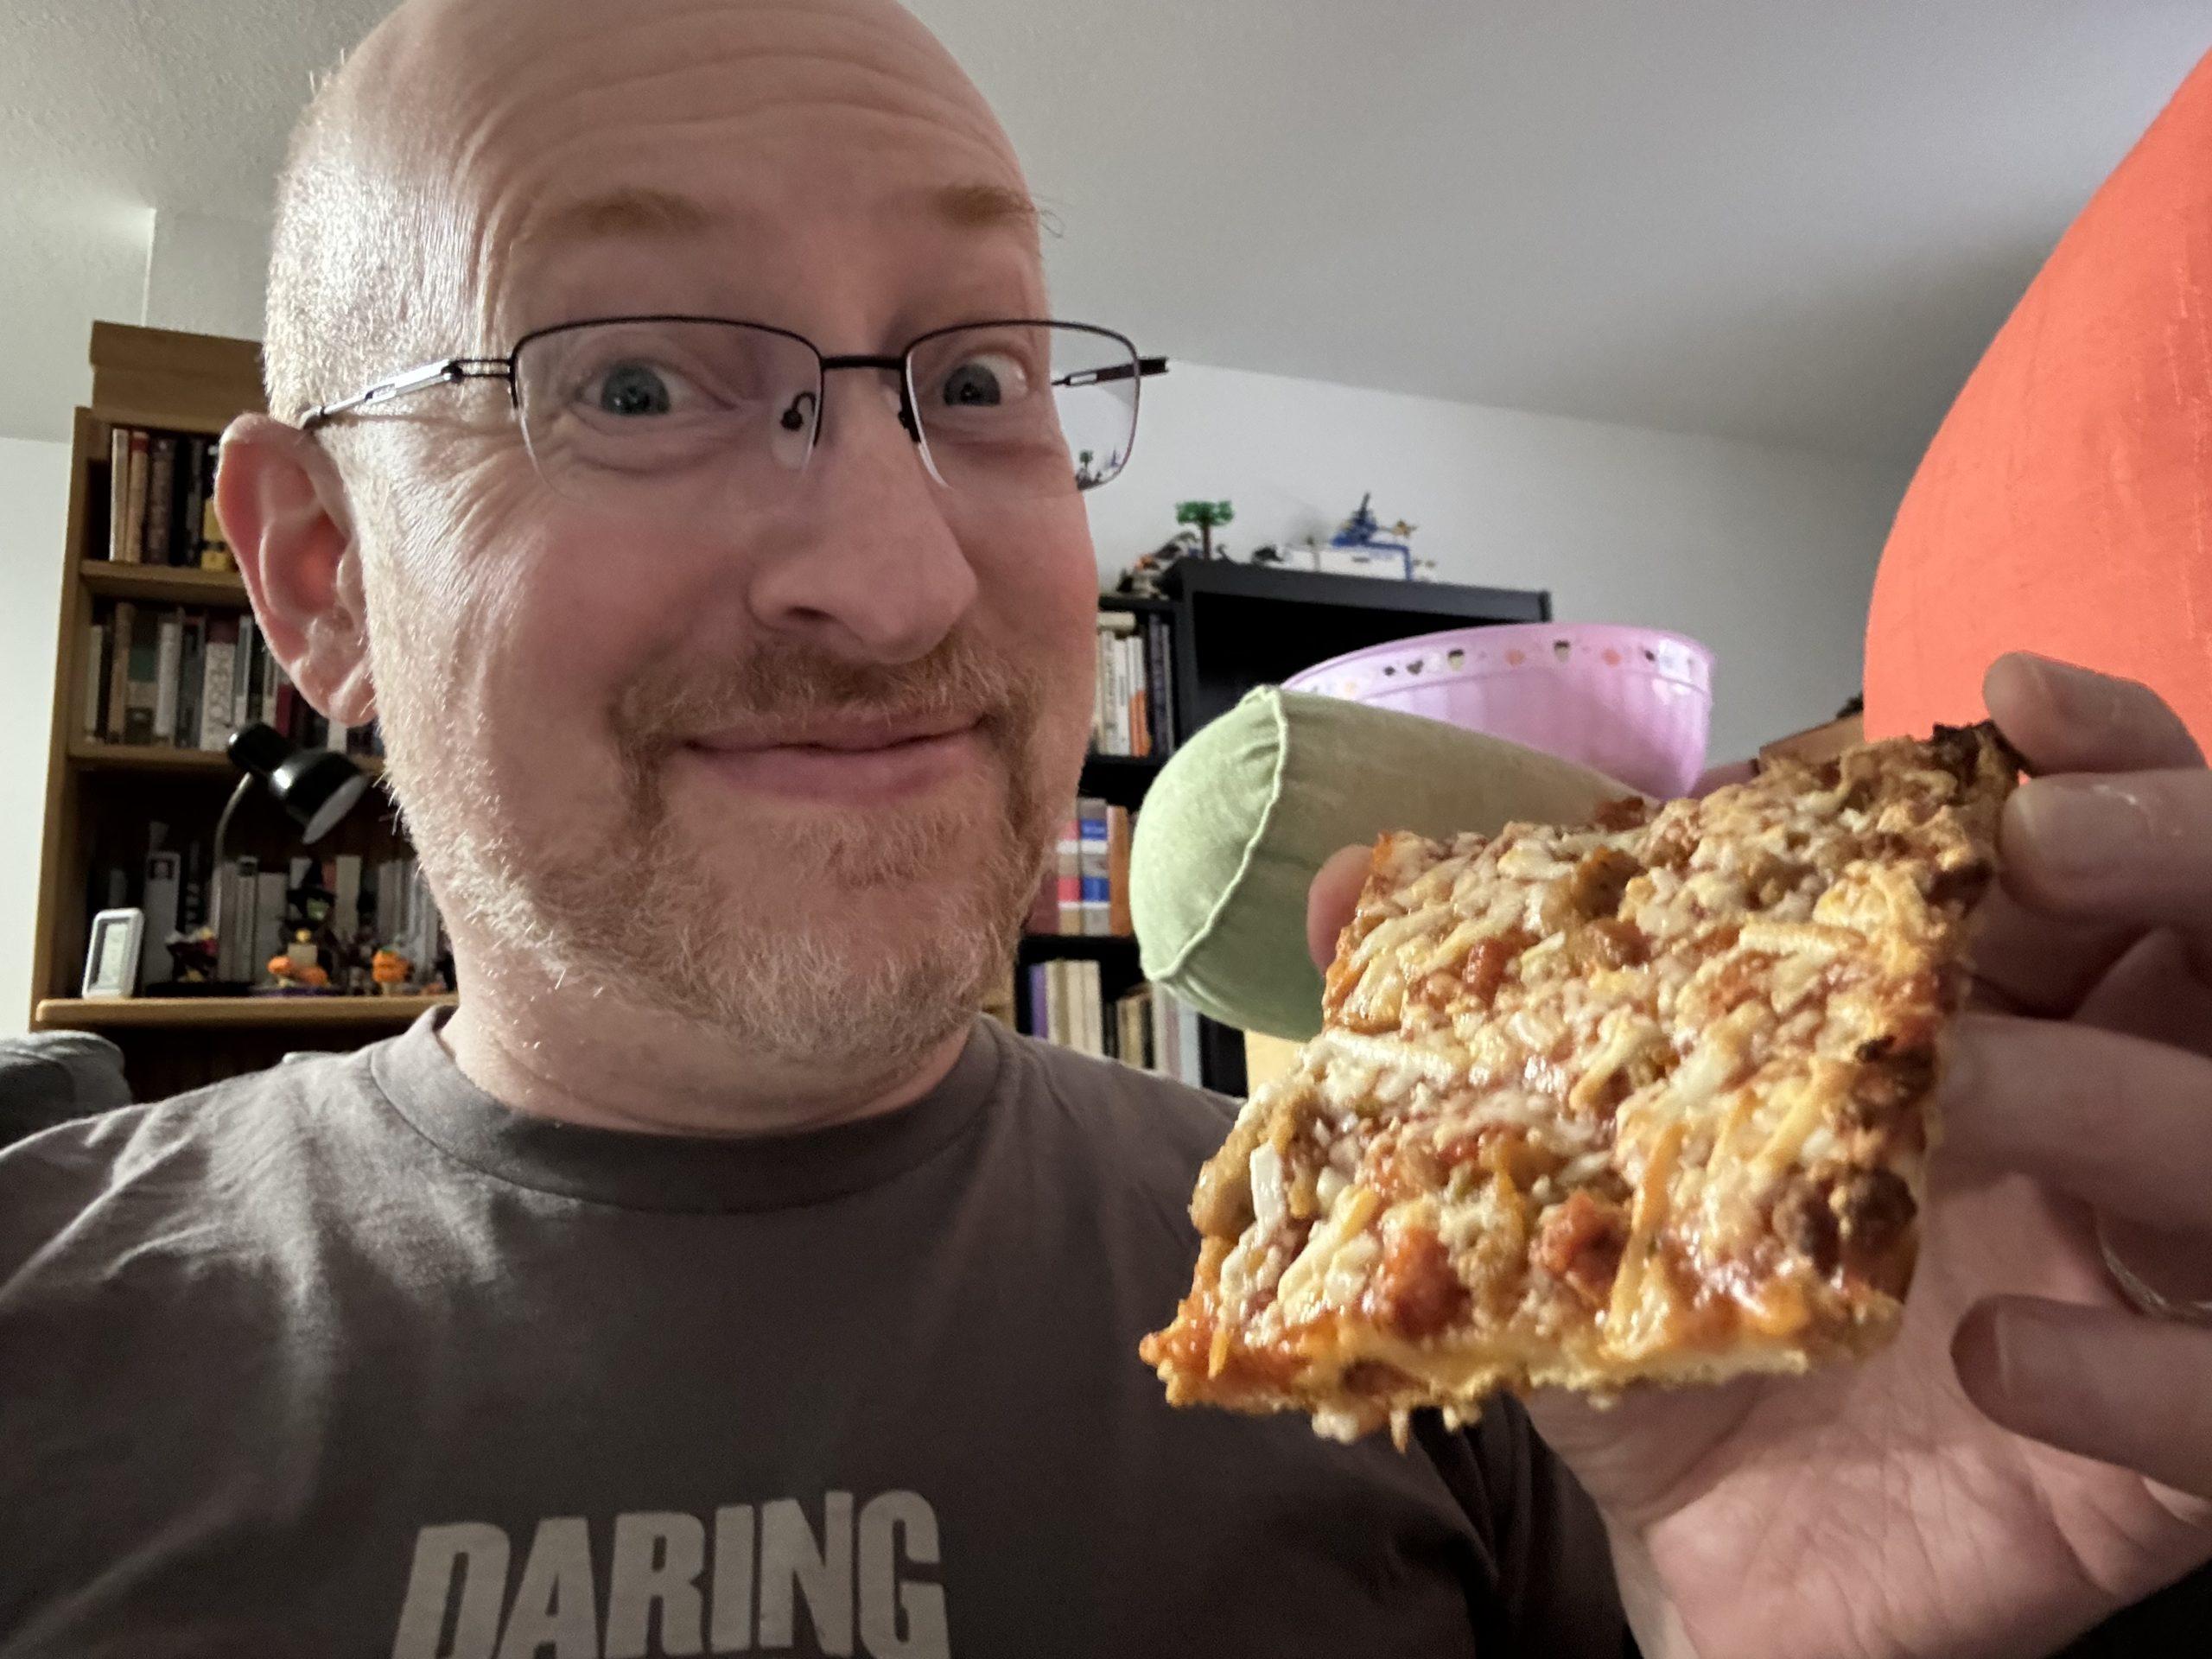 Me with a goofy smile and raised eyebrows, holding a piece of Tortino's pizza.